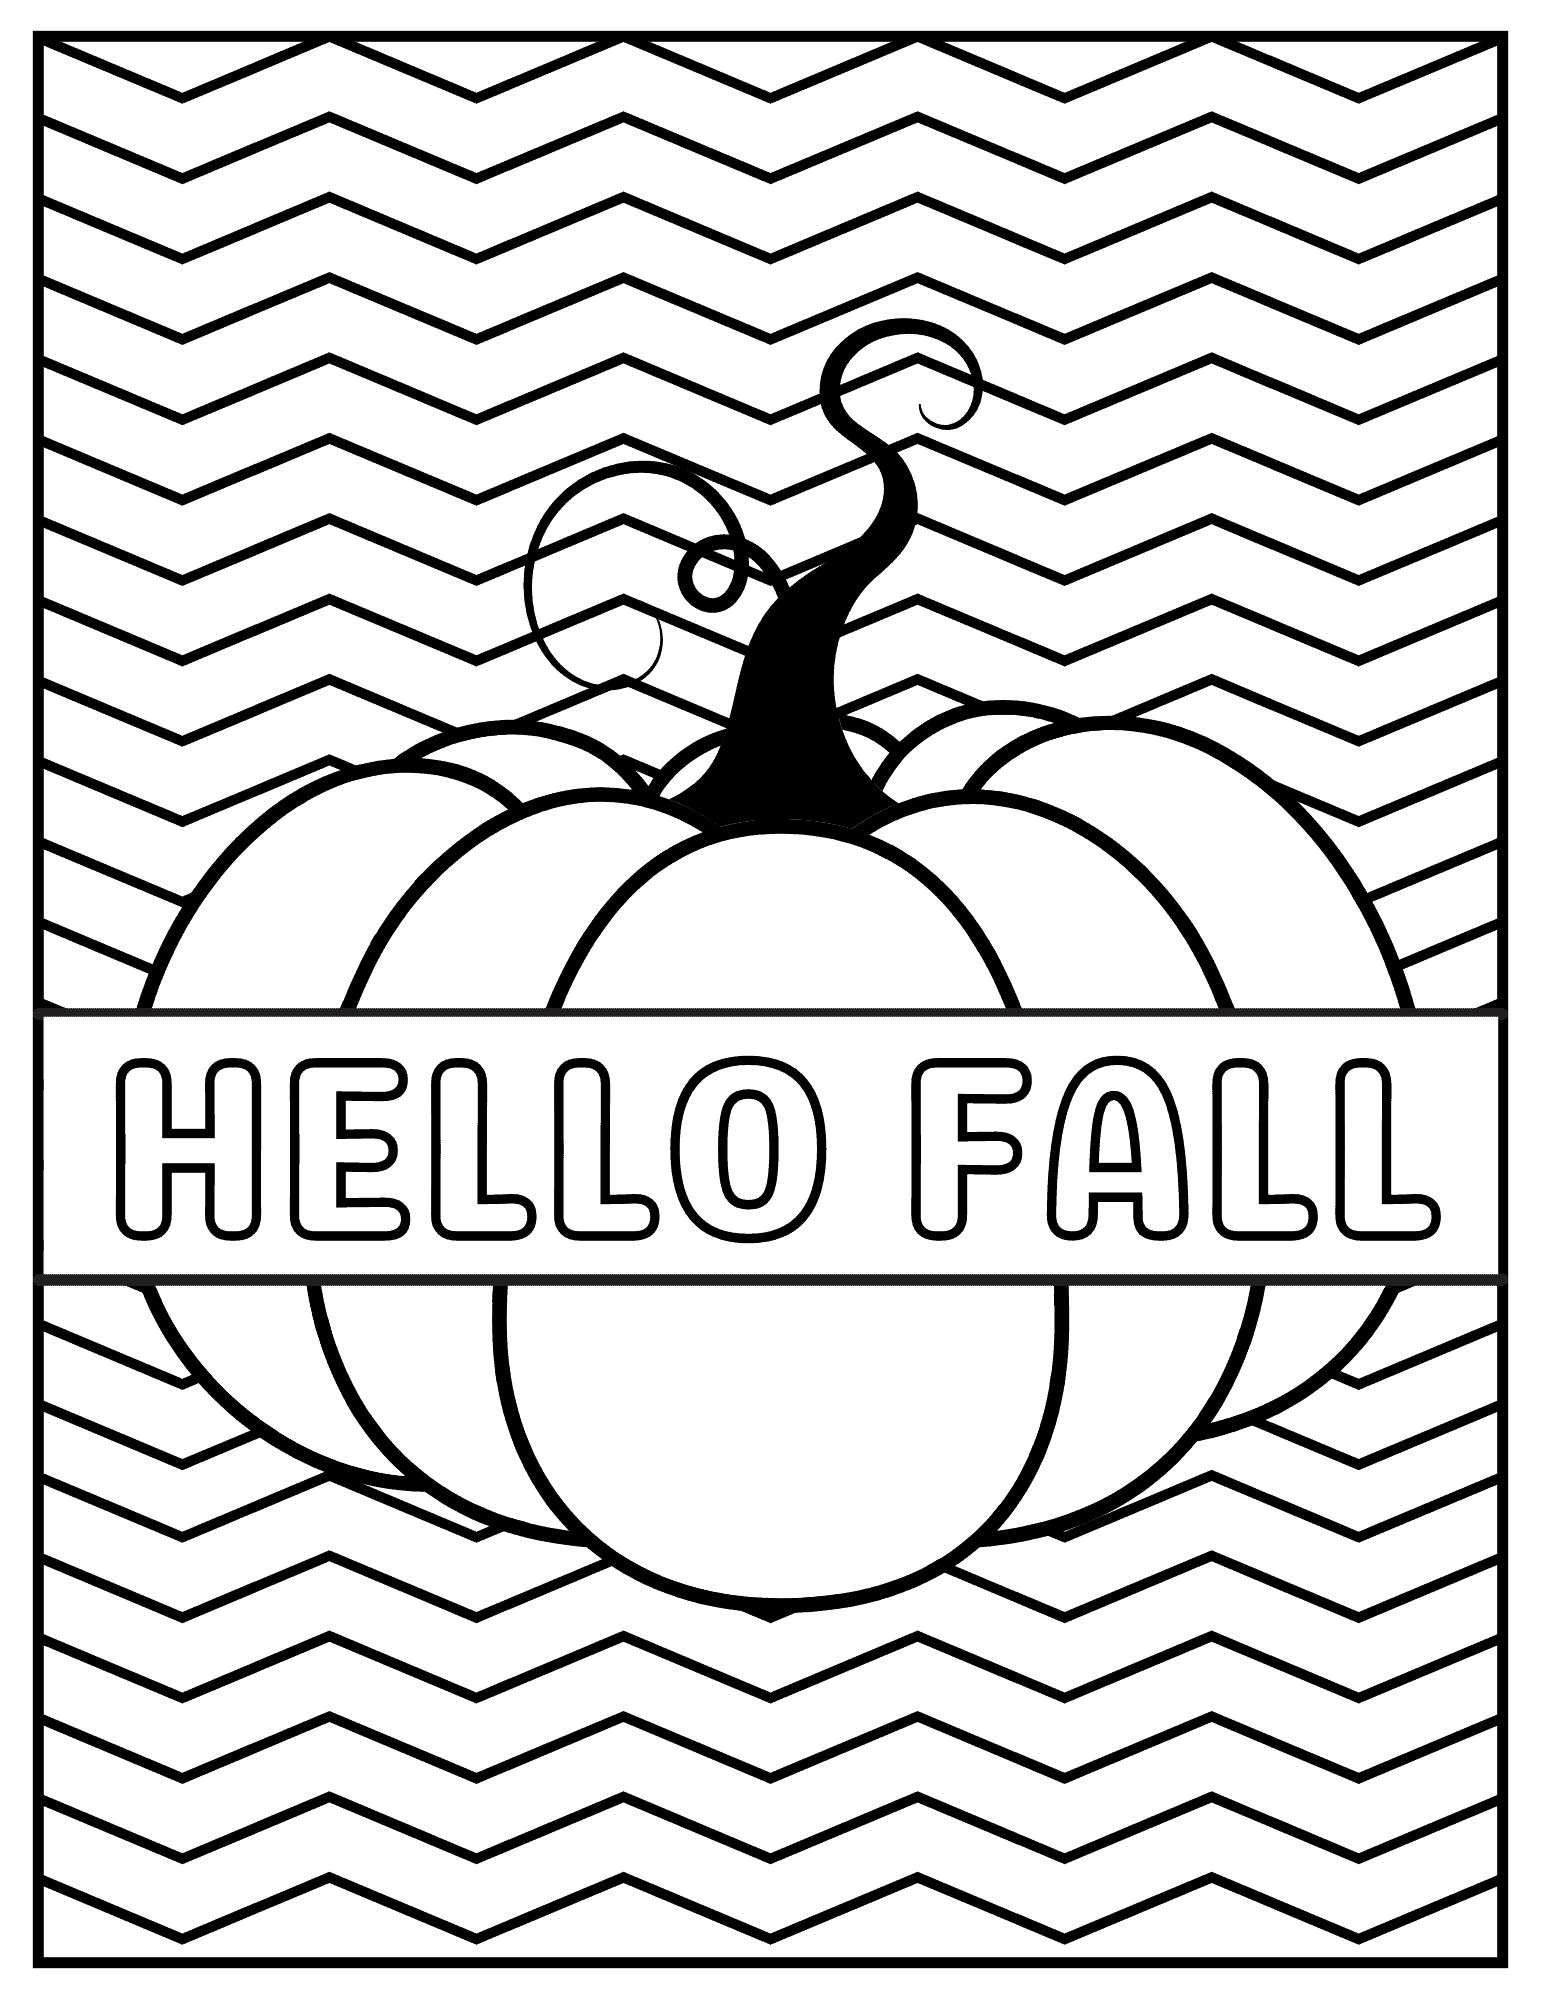 30 Free Printable Fall Coloring Pages - Prudent Penny Pincher intended for Fall Printable Coloring Pages Free